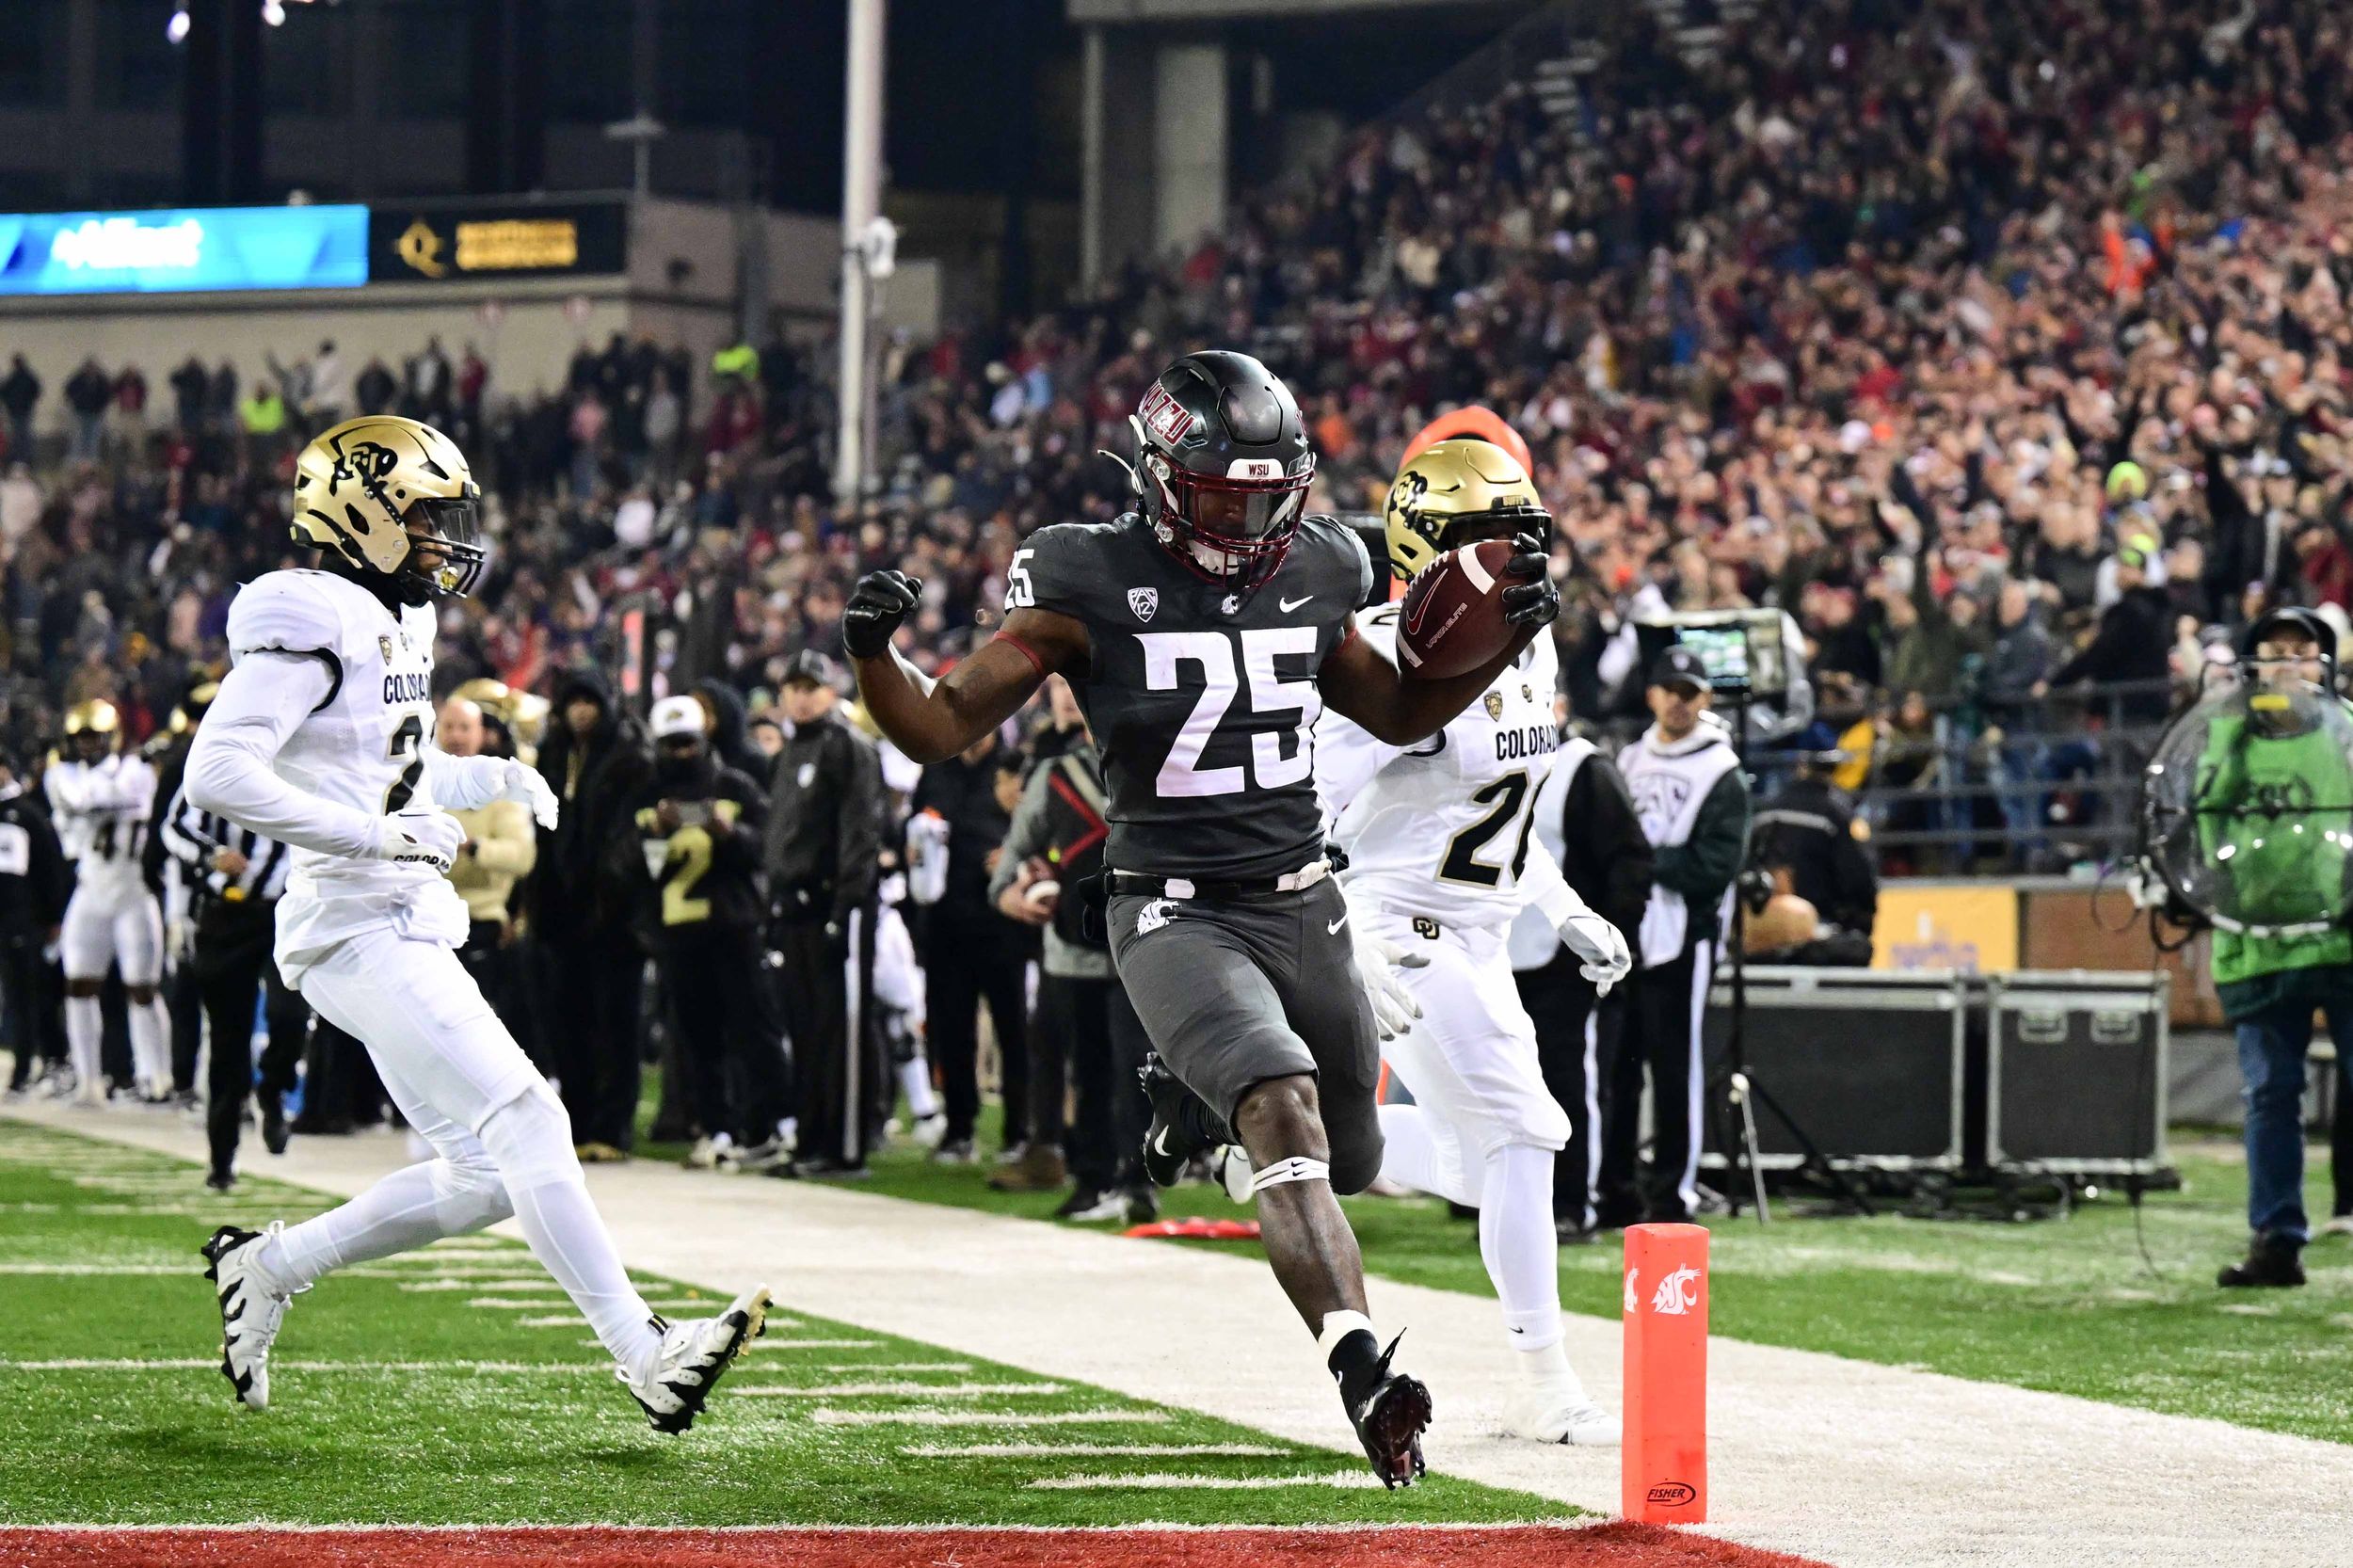 Wsu Rb Nakia Watson Is Returning To Form — Which May Be The Best News Of All For The Cougs The